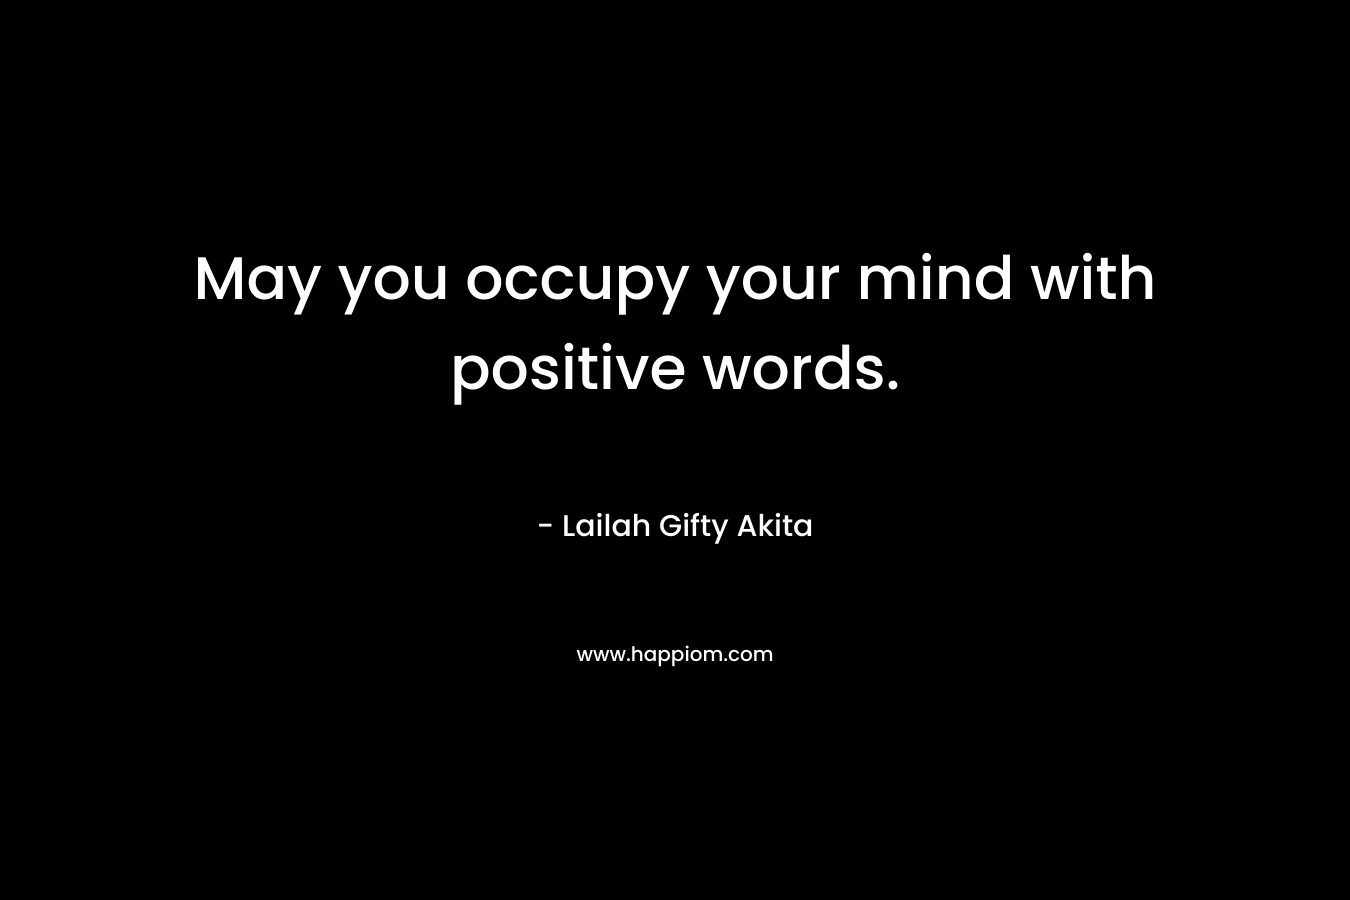 May you occupy your mind with positive words.